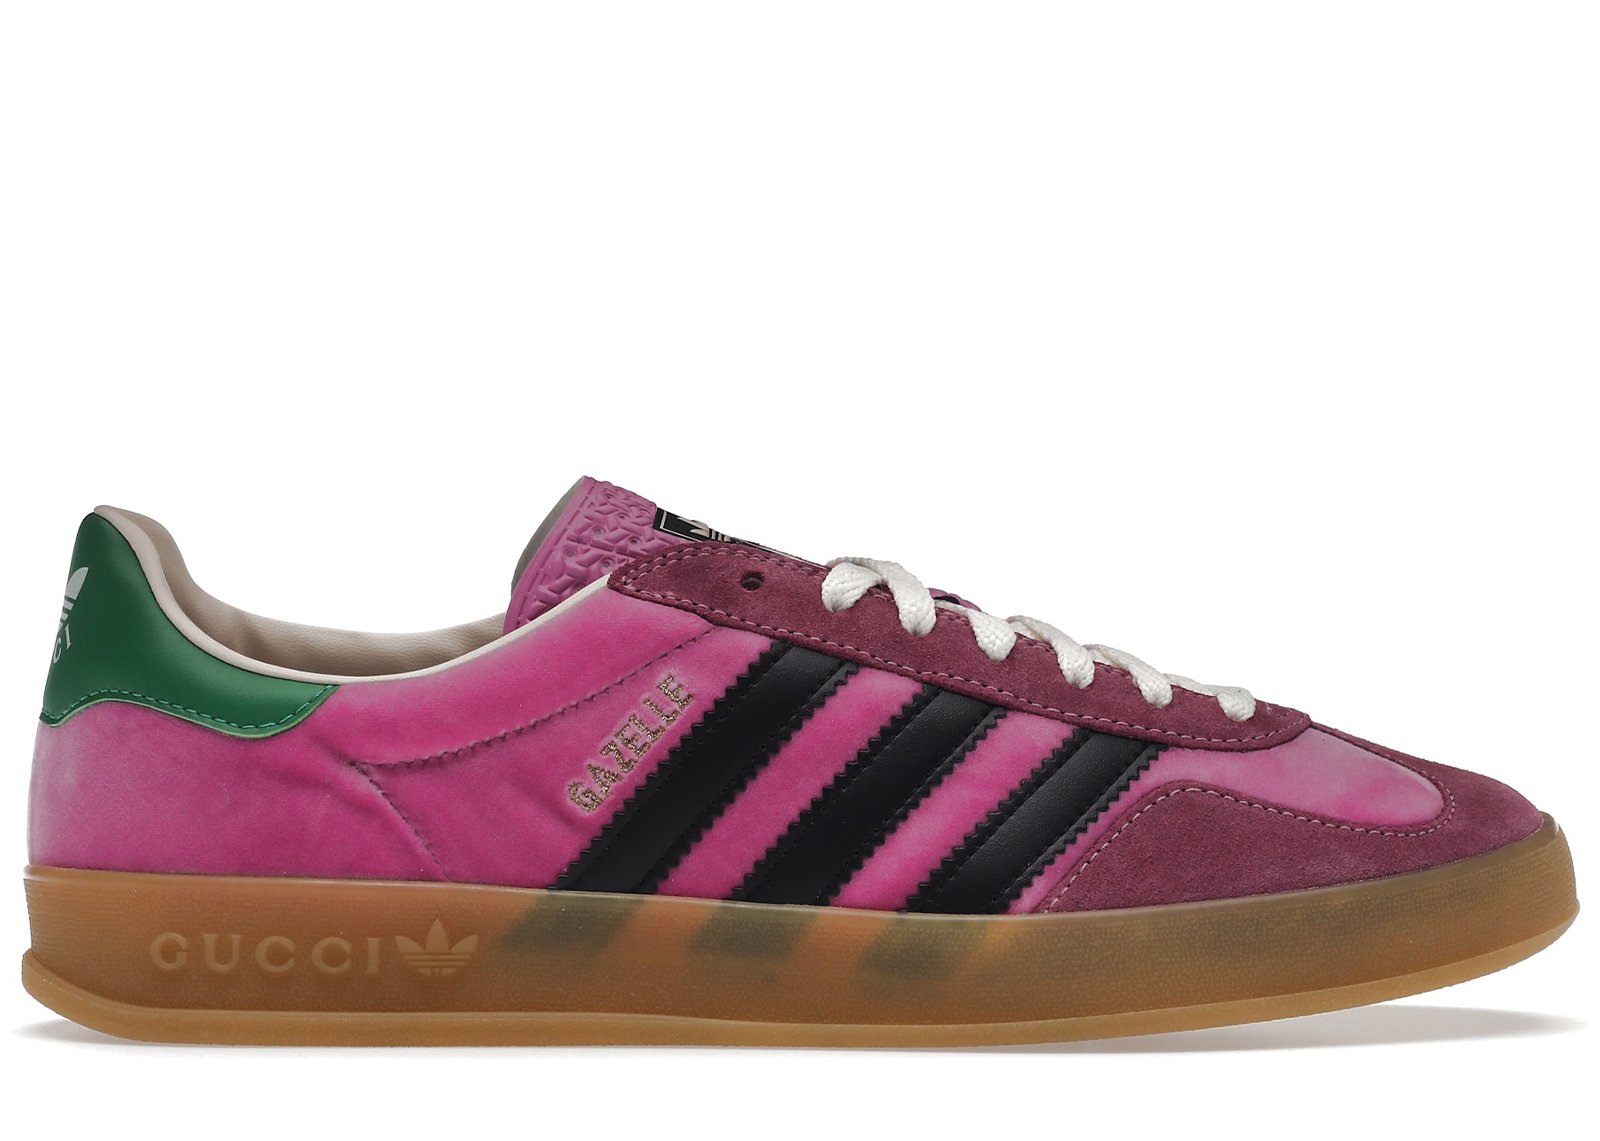 adidas x Gucci Gazelle Pink sneakers